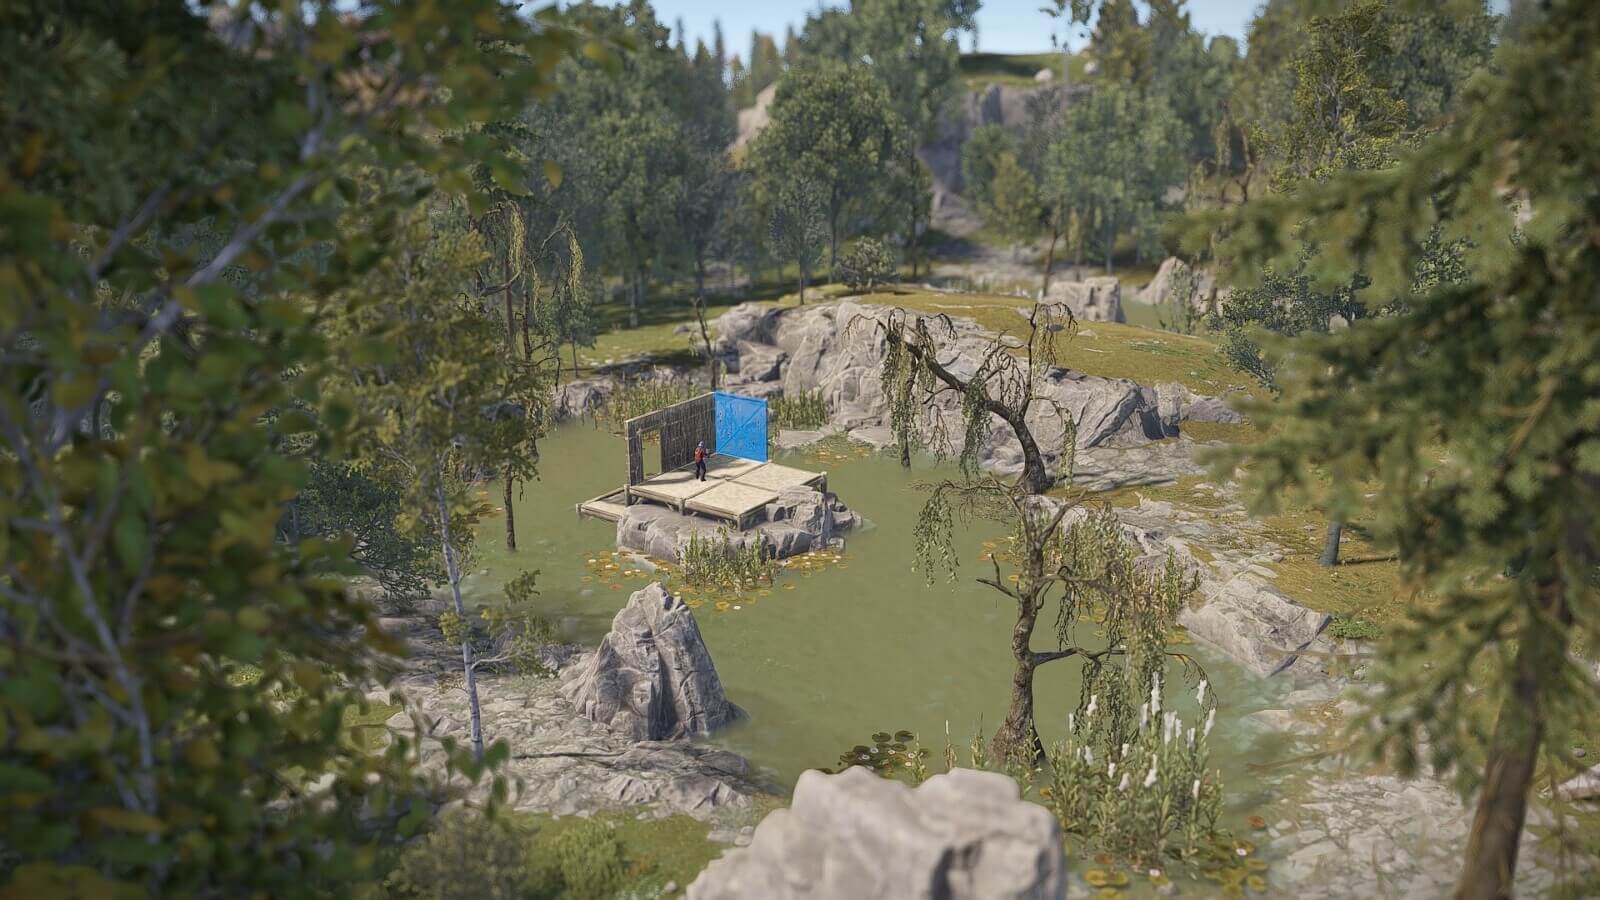 Demonstrating that custom swamps can be easily built on/in for some neat base locations.